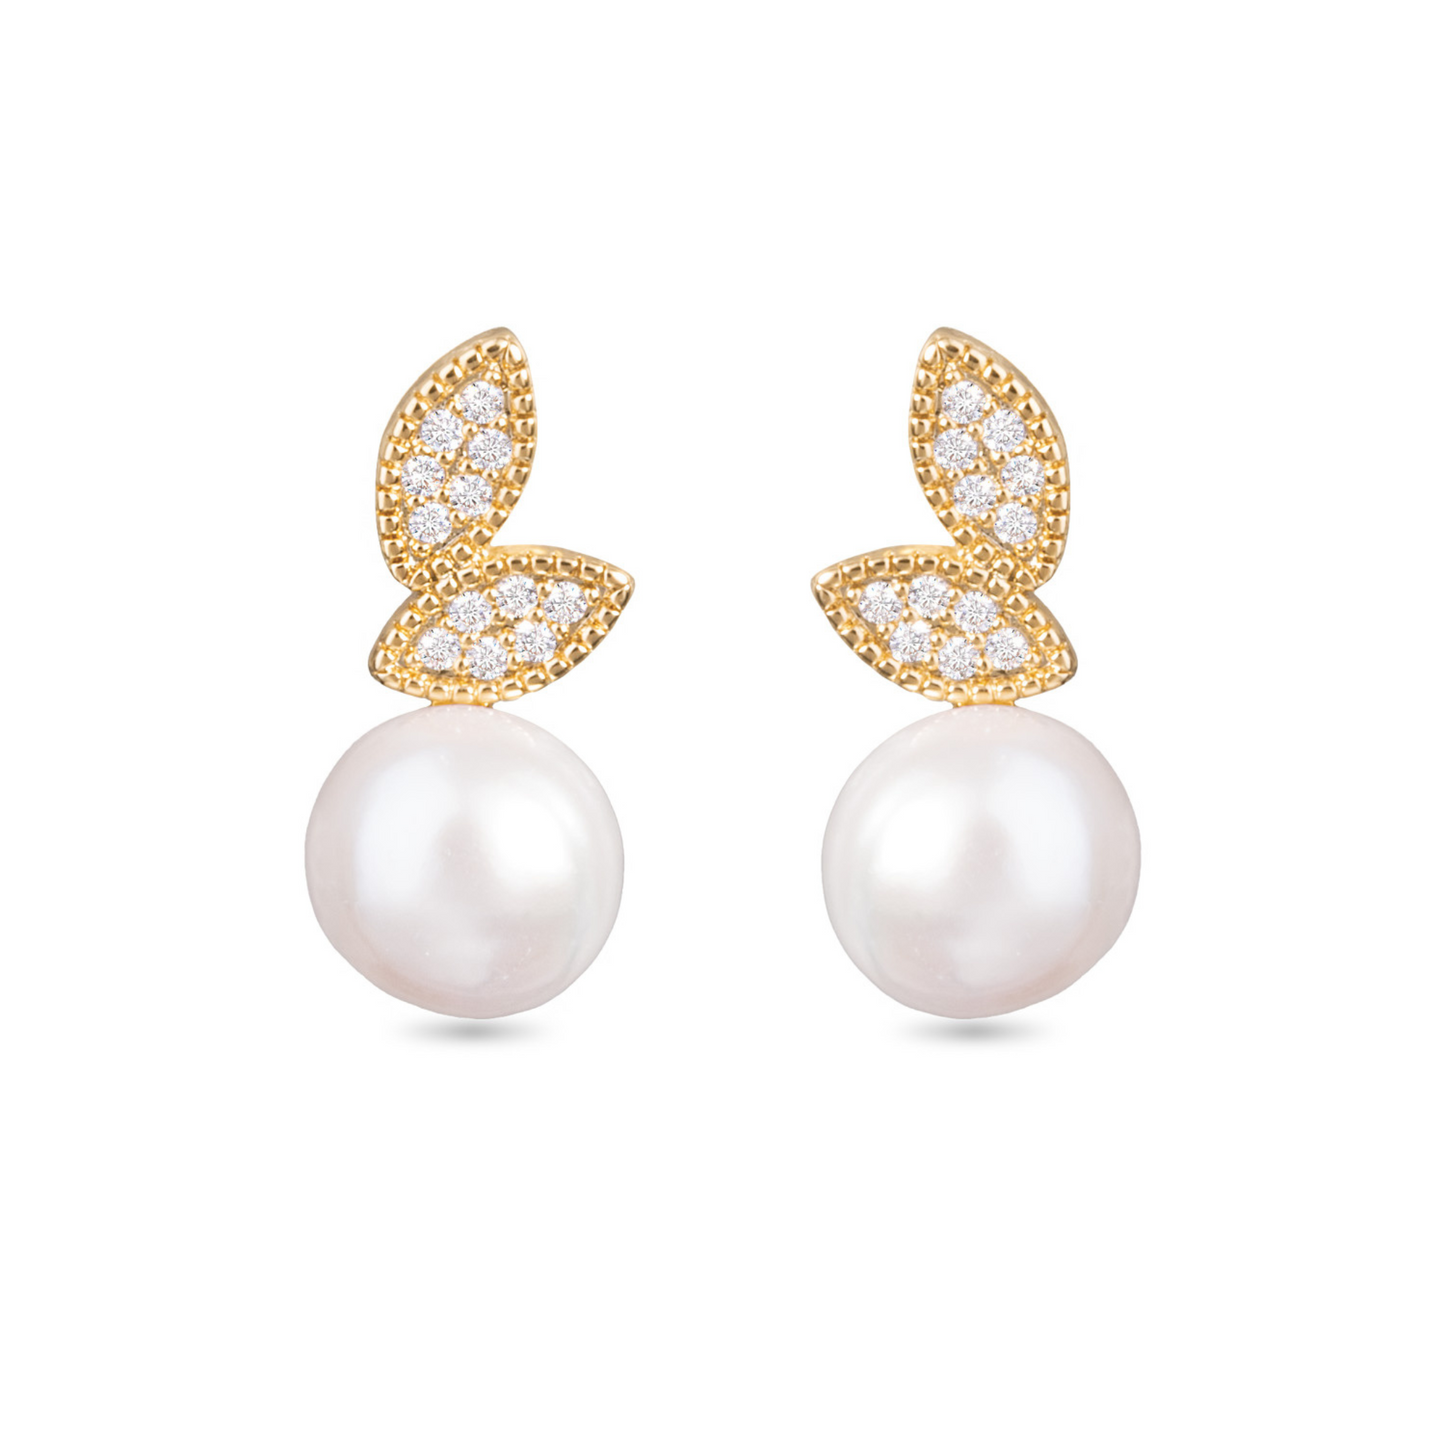 Add a touch of elegance to your outfit with our Leaf with Pearl Studs. Crafted in gold with rhinestone accents, these stunning earrings feature a delicate leaf design and a lustrous pearl to complete the look. Perfect for any occasion, these studs are sure to make a statement.